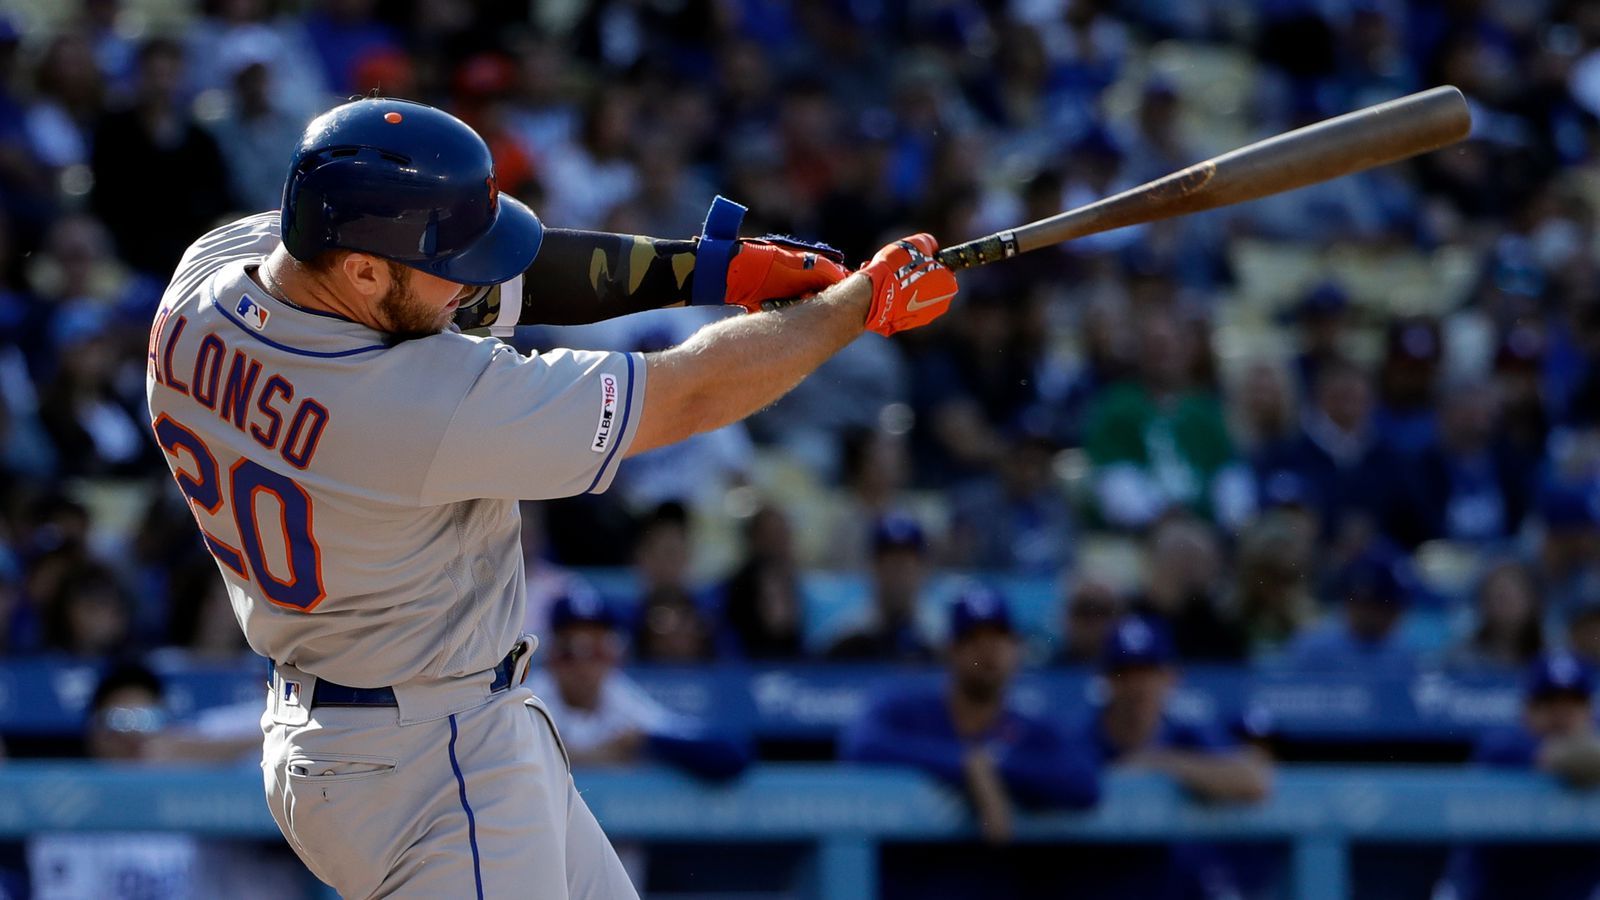 Plant High's Pete Alonso is slugging his way into baseball history and the hearts of Mets fans